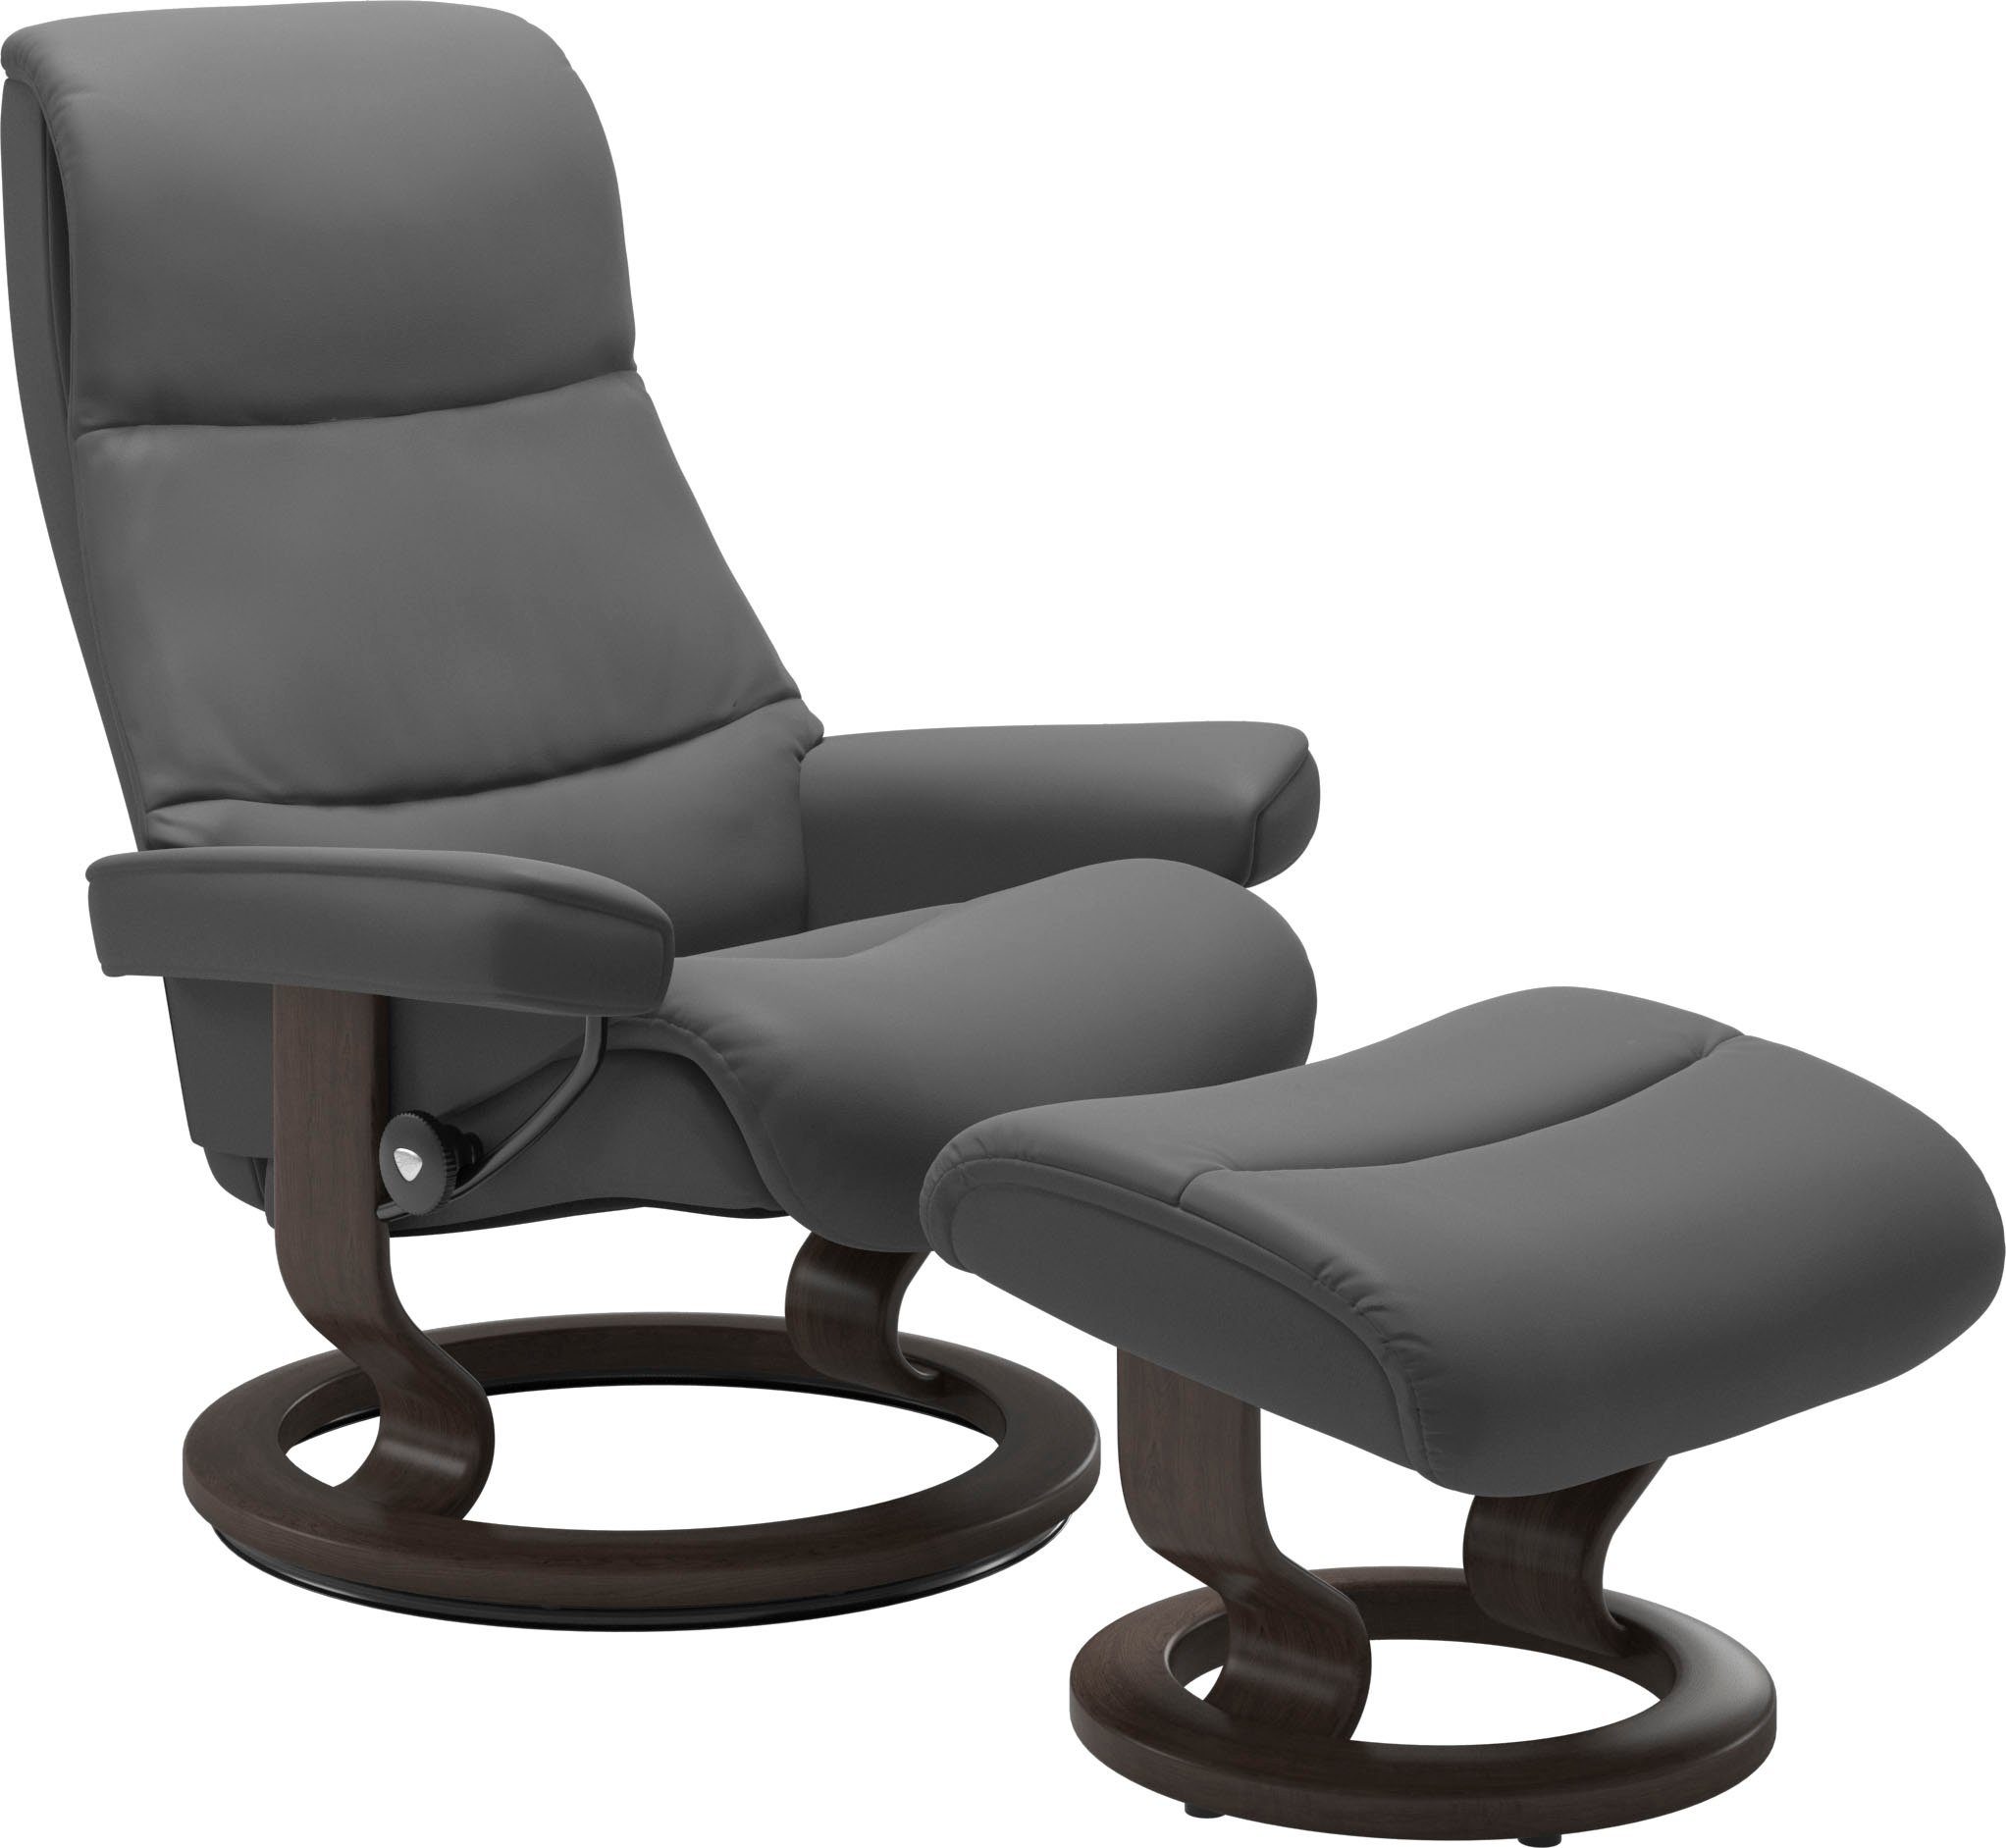 Base, M,Gestell Relaxsessel View, Wenge Größe Classic Stressless® mit